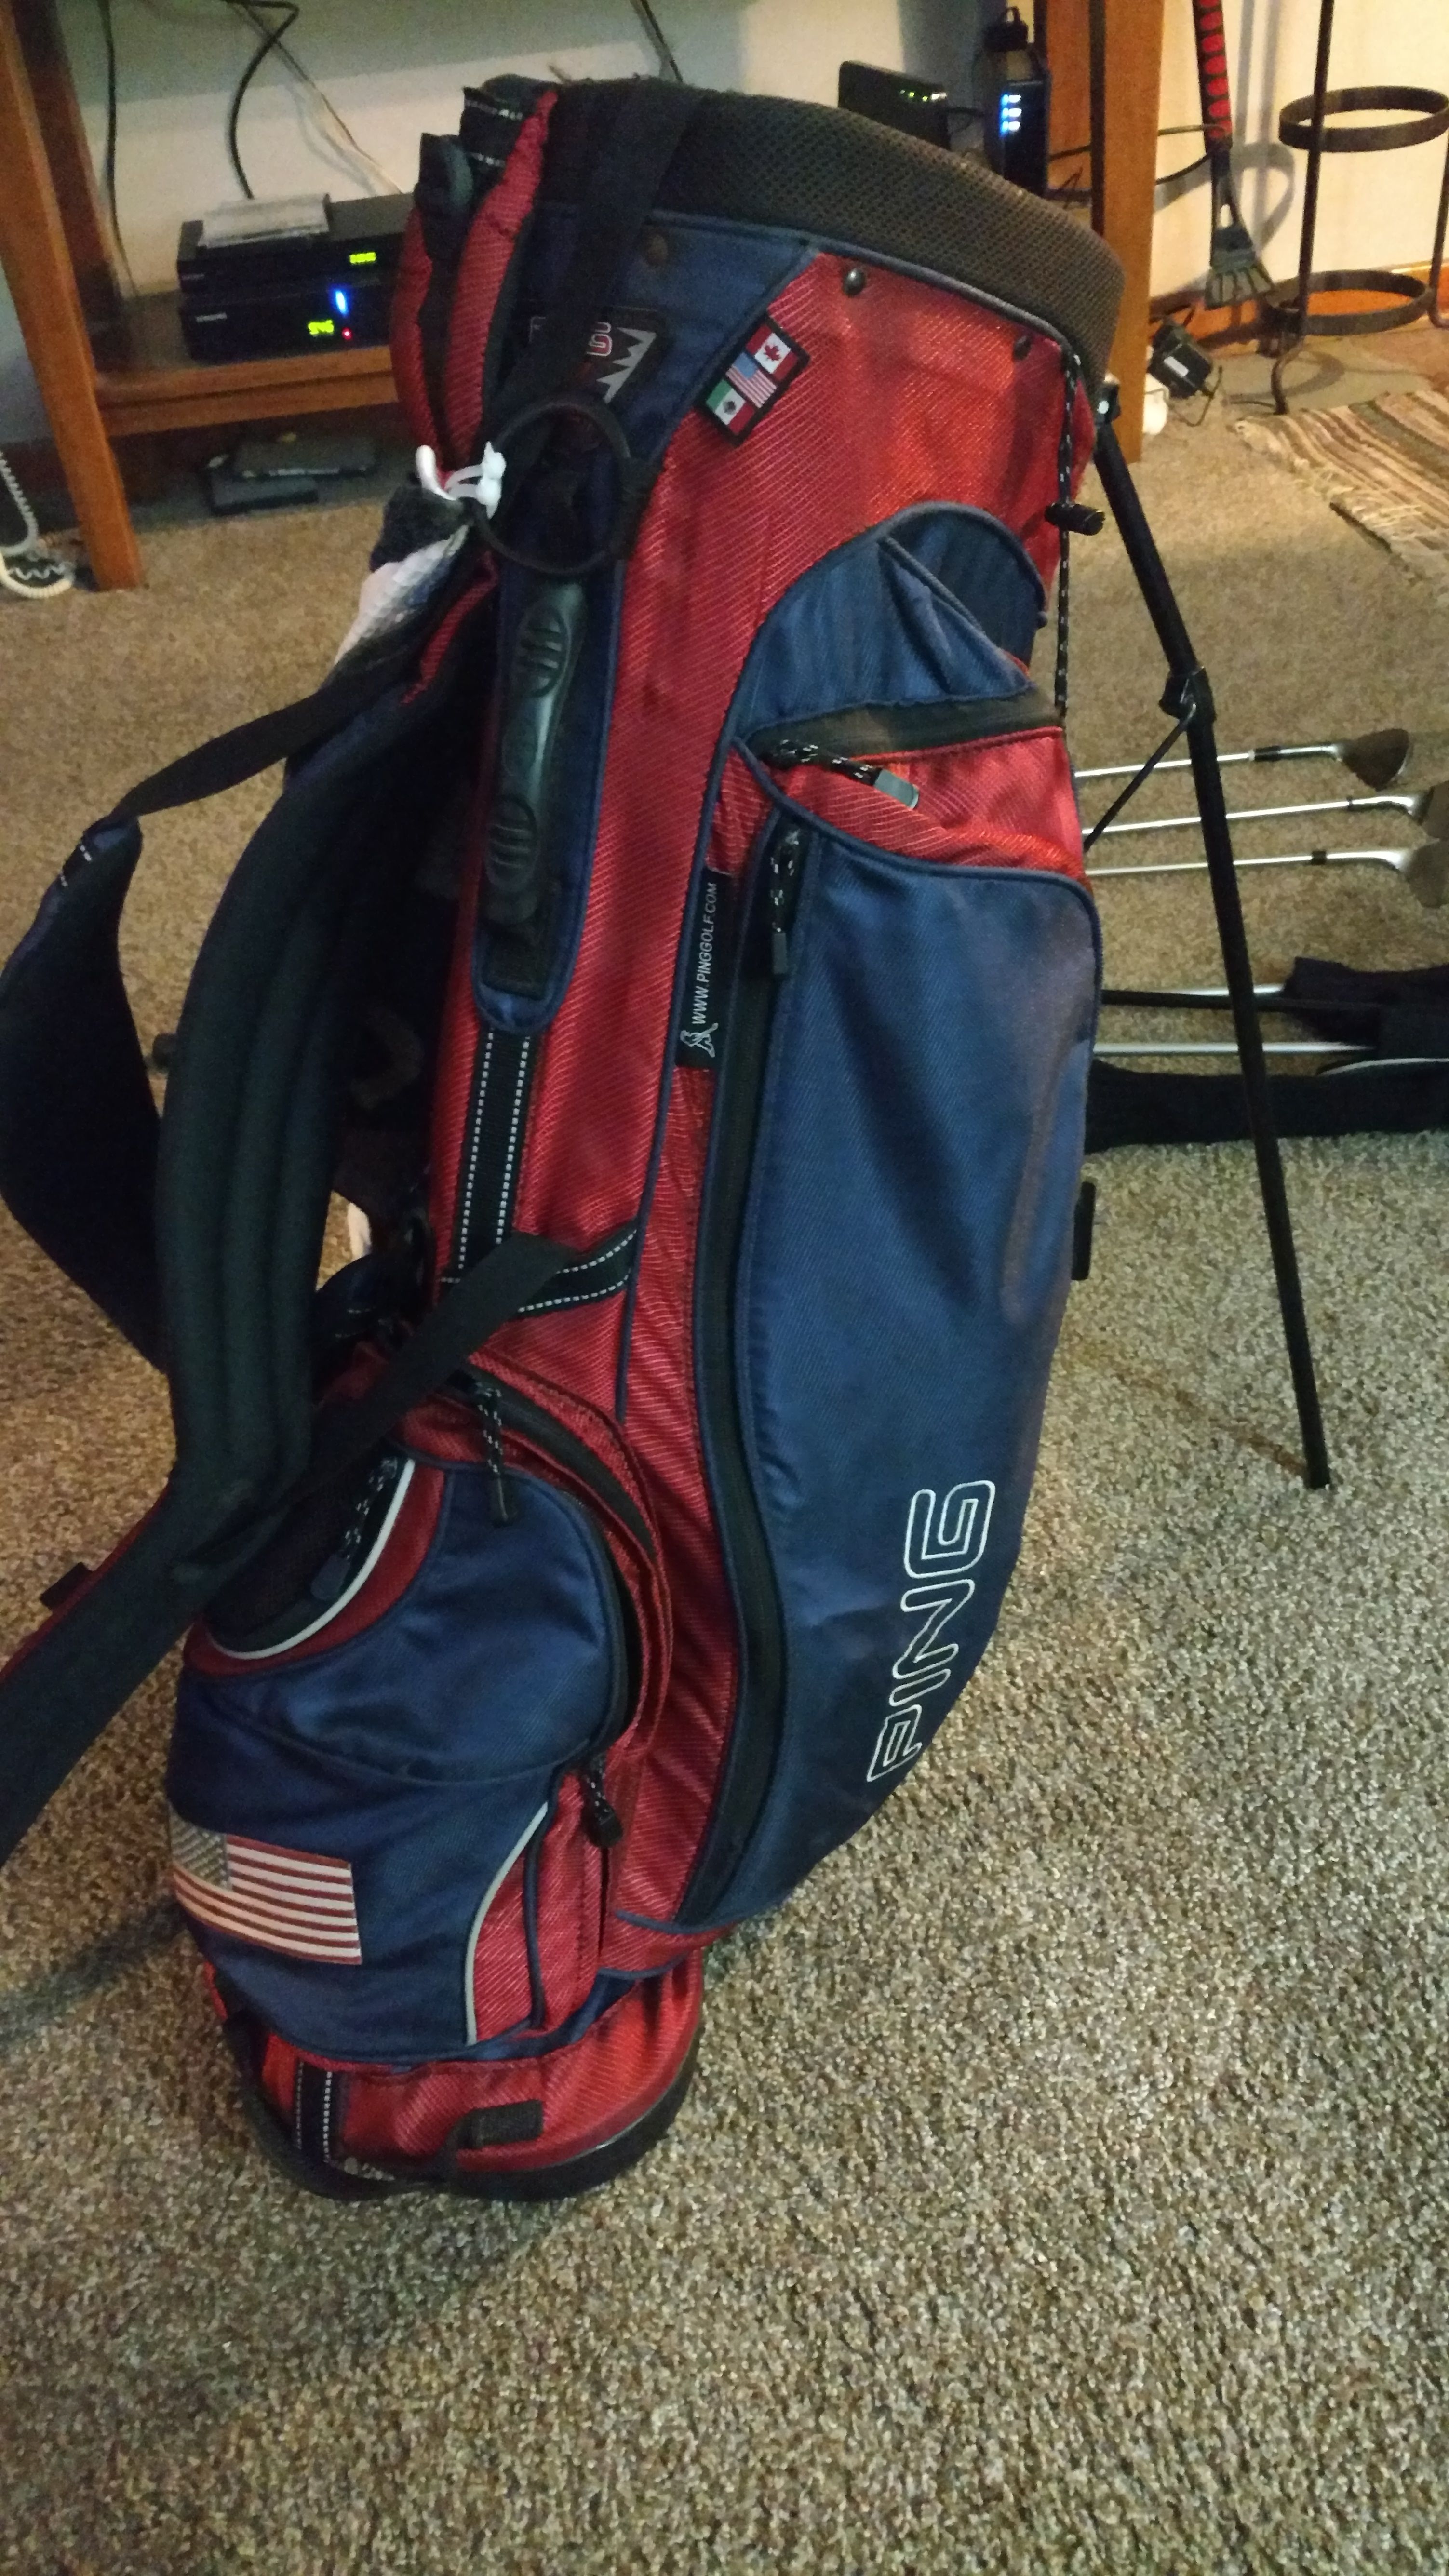 Ping golf bag w brookside country club logo on the other side and an American flag on the bottom where the ball bag is